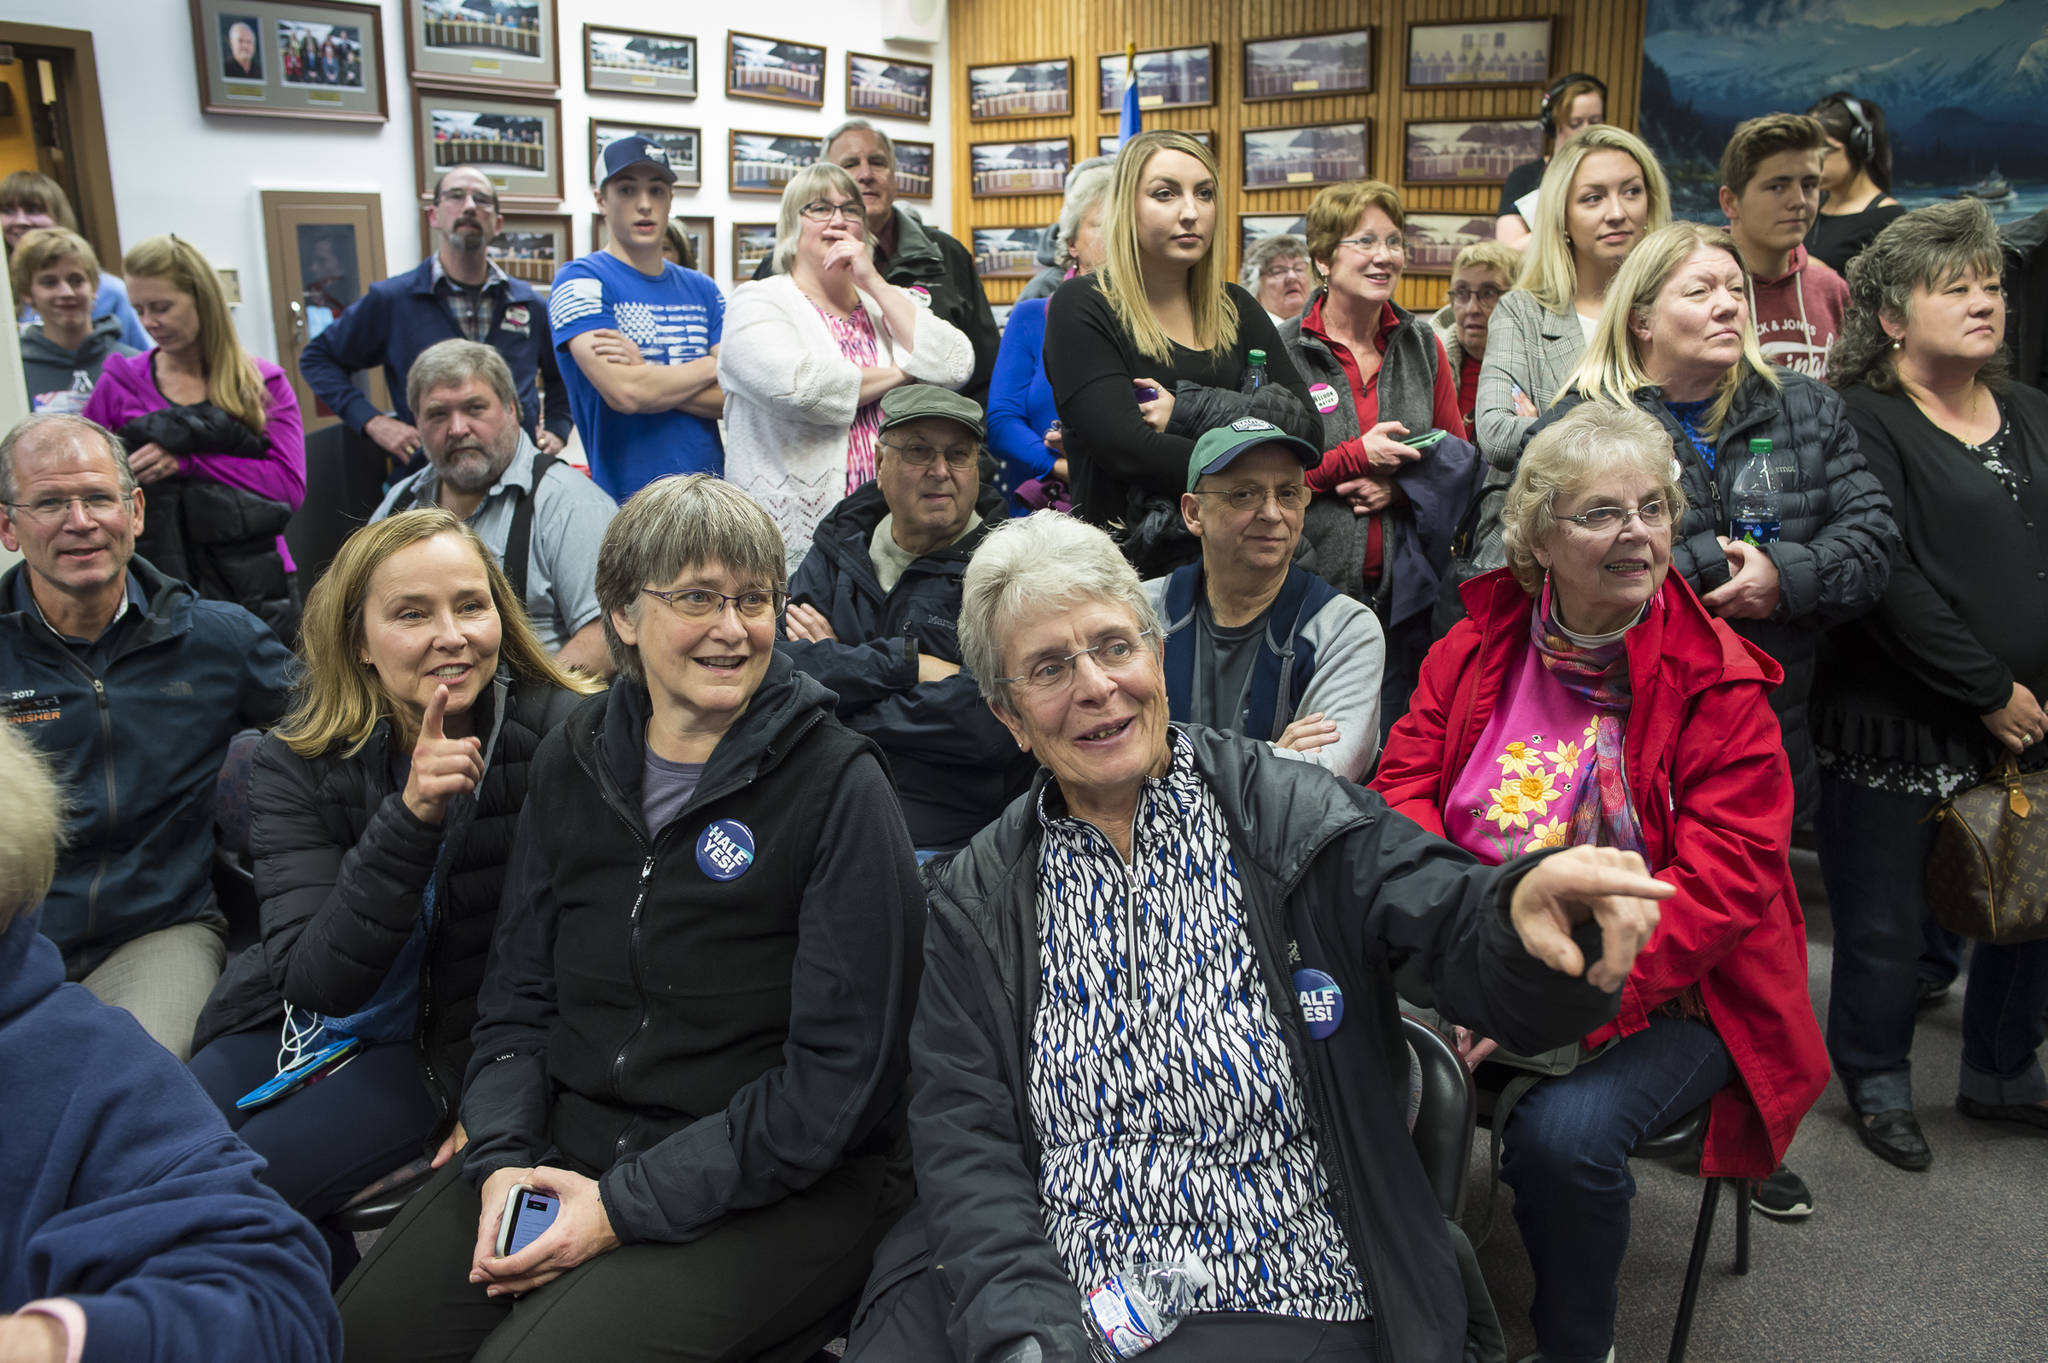 Juneau residents pack into the Assembly chambers to watch election results on Tuesday, Oct. 2, 2018. (Michael Penn | Juneau Empire)